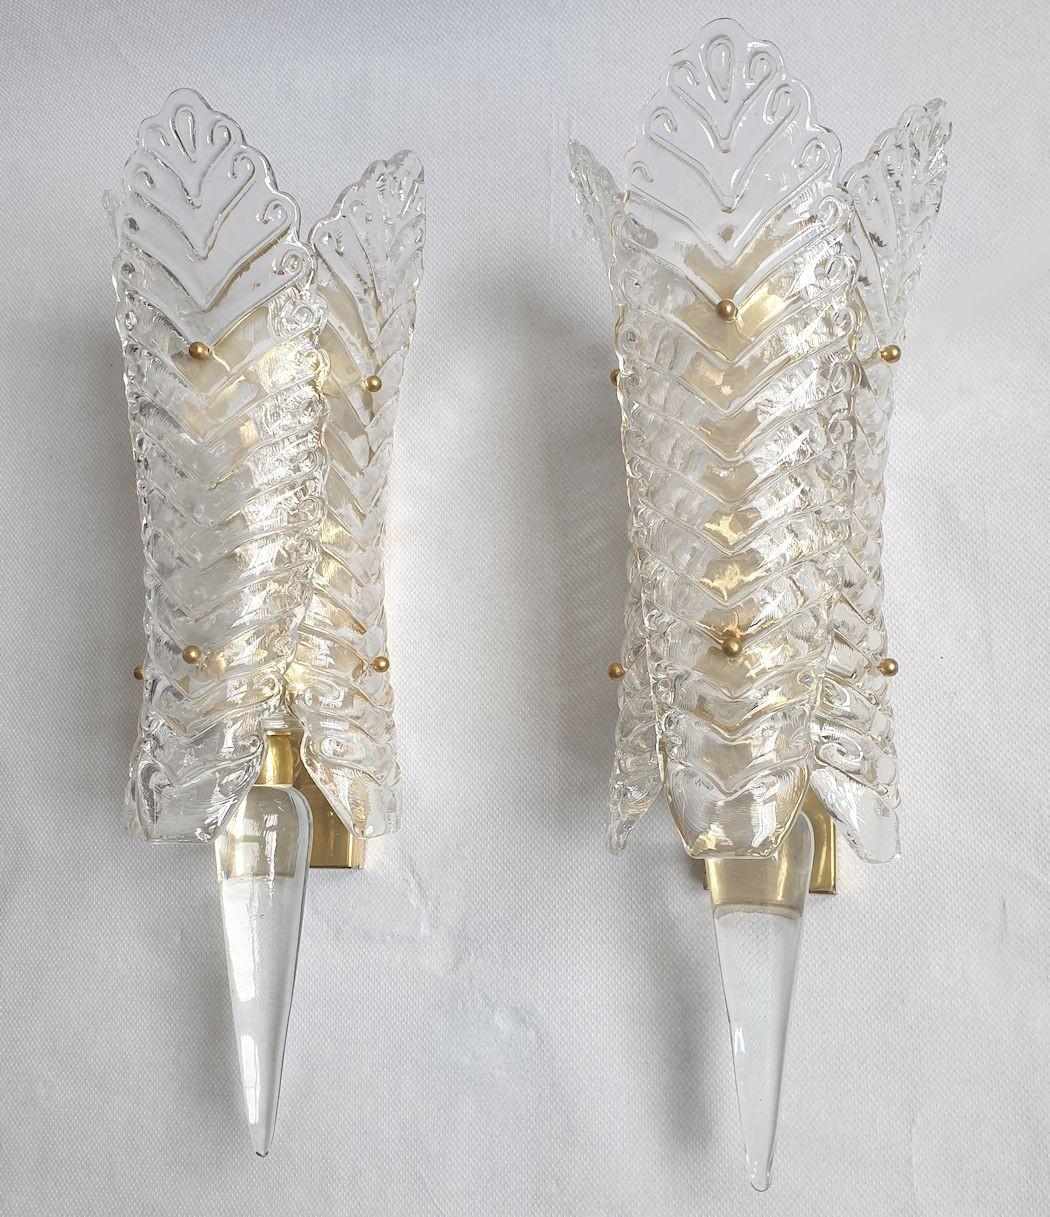 Pair of Mid Century Modern Murano glass sconces, Barovier & Toso style, Italy 1970s.
The vintage Murano sconces are hand blown, in clear, translucent glass, with a brass frame.
Each sconce is nesting two lights, and is rewired for the US.
Create a